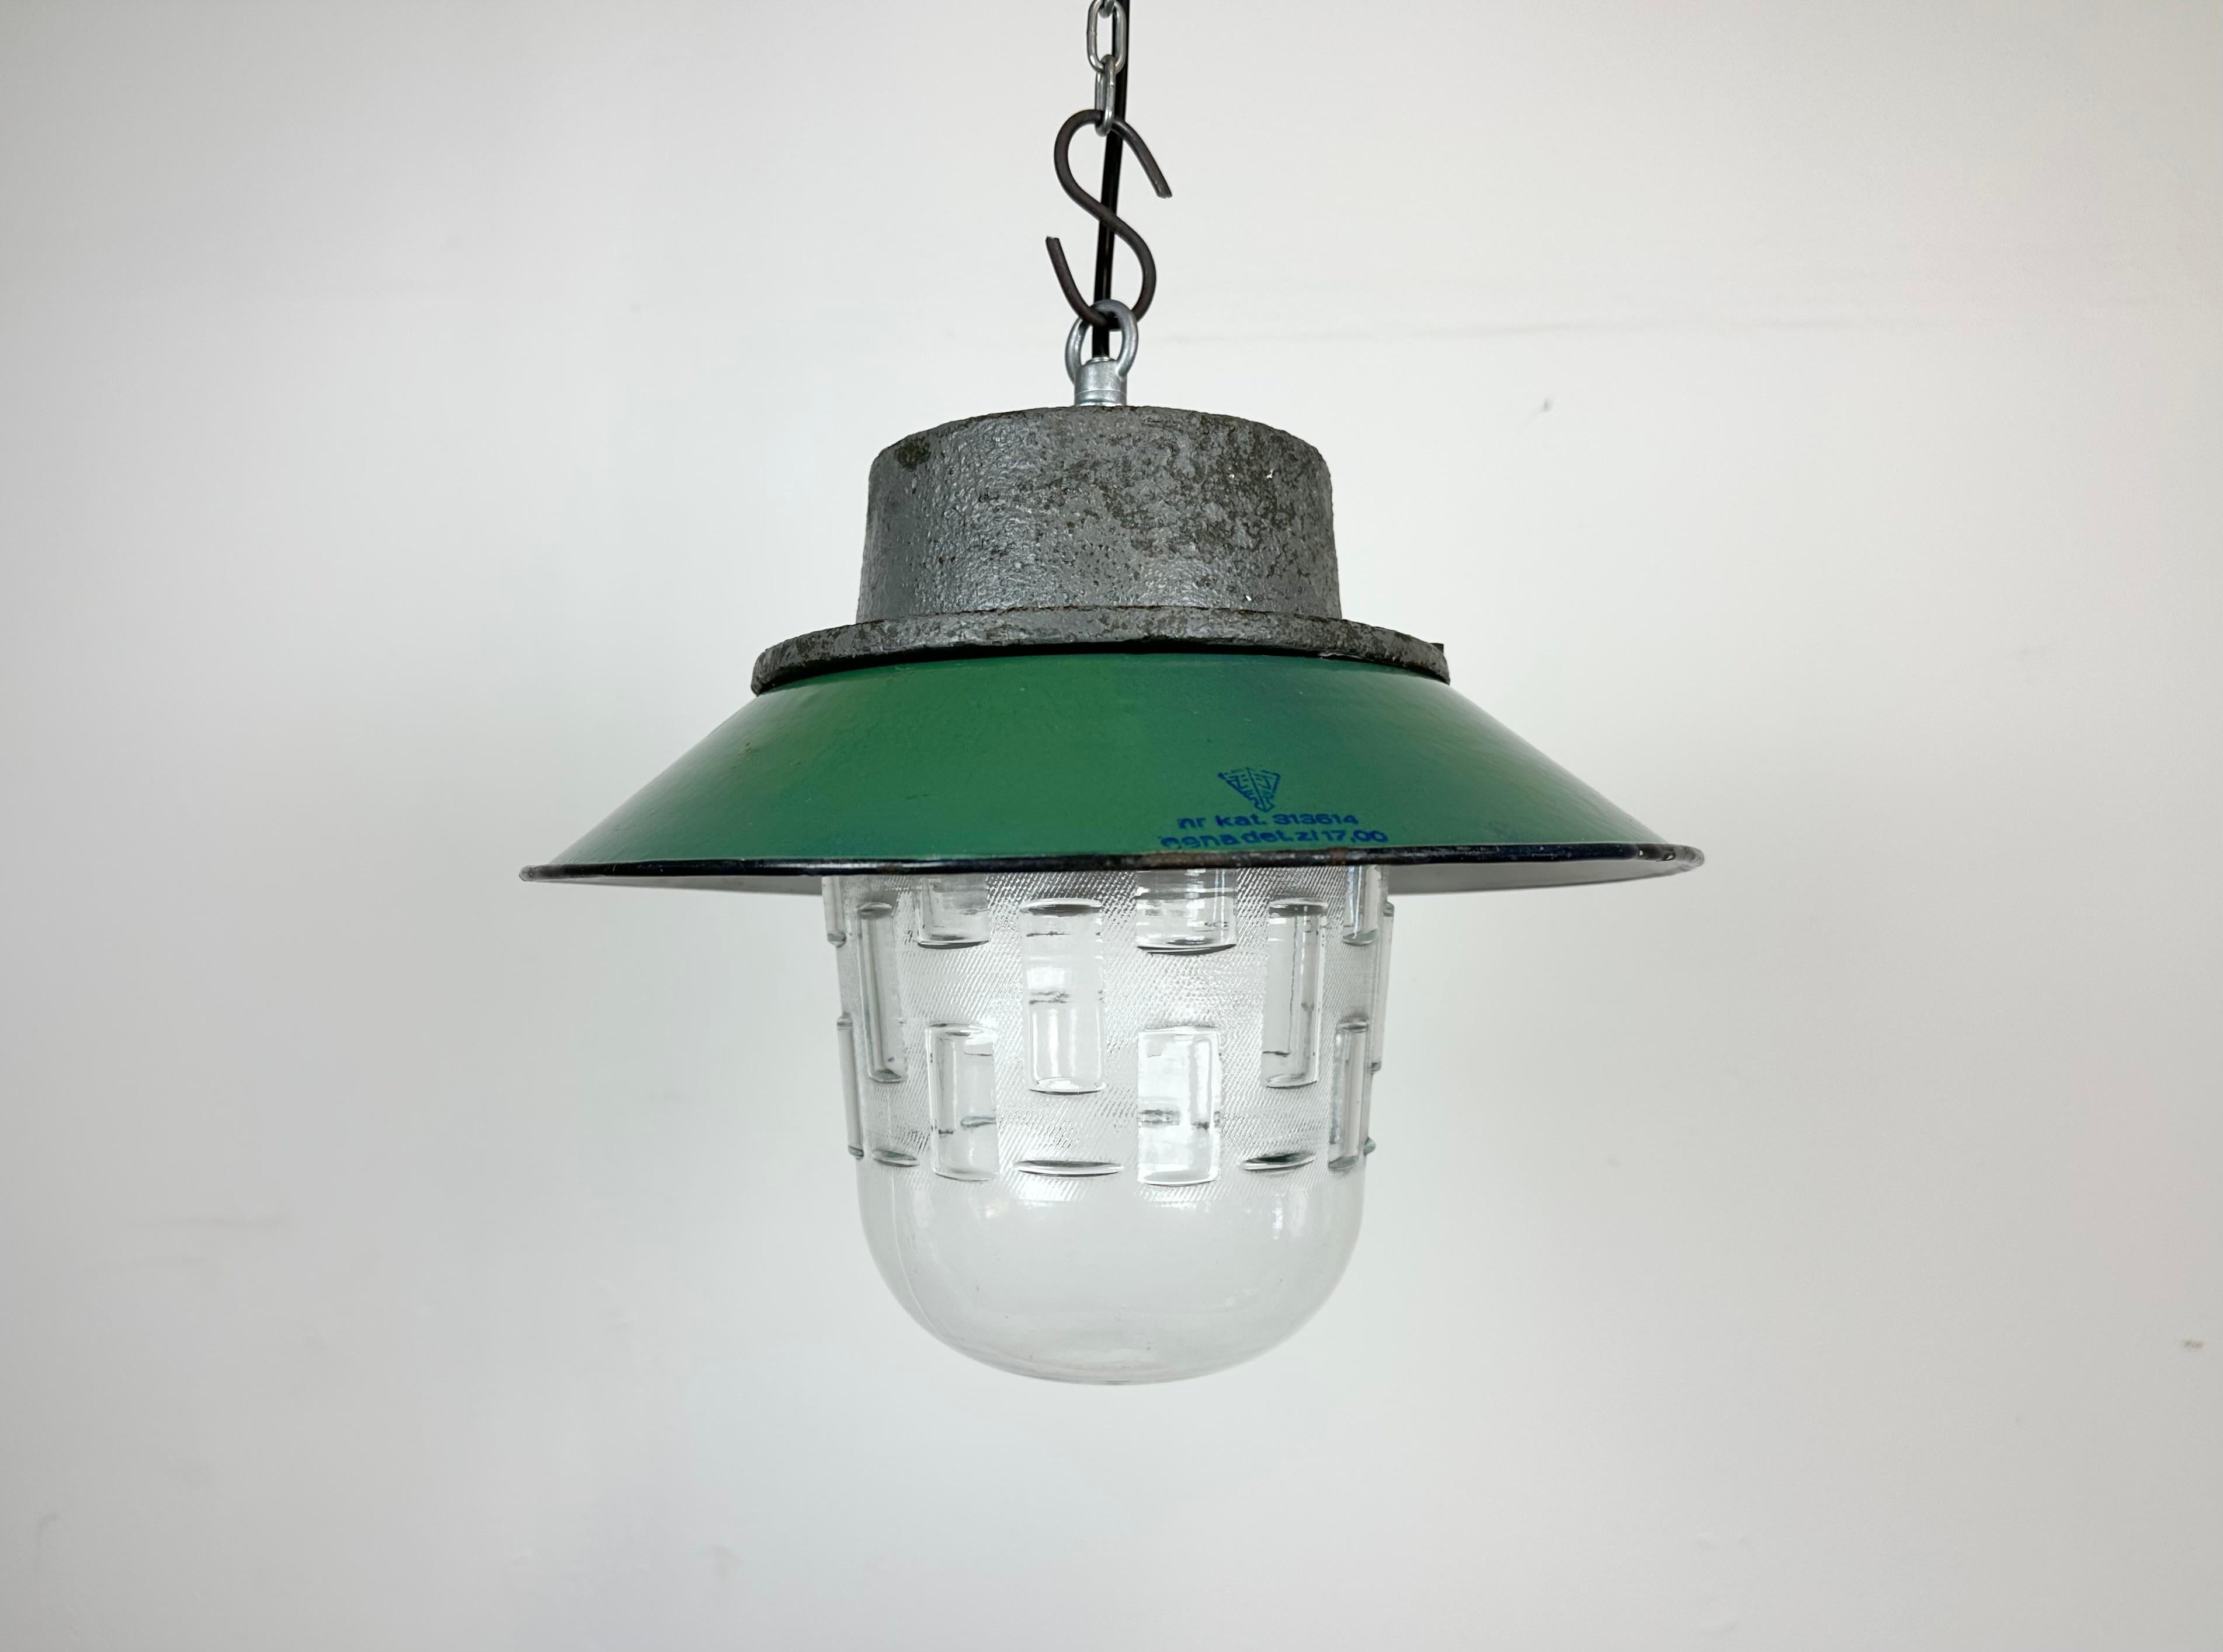 Industrial hanging lamp manufactured in Poland during the 1960s. It features a green enamel shade with white enamel interior, a cast iron top and a glass cover. The porcelain socket requires E 27/ E26 lightbulbs .New wire. The weight of the lamp is